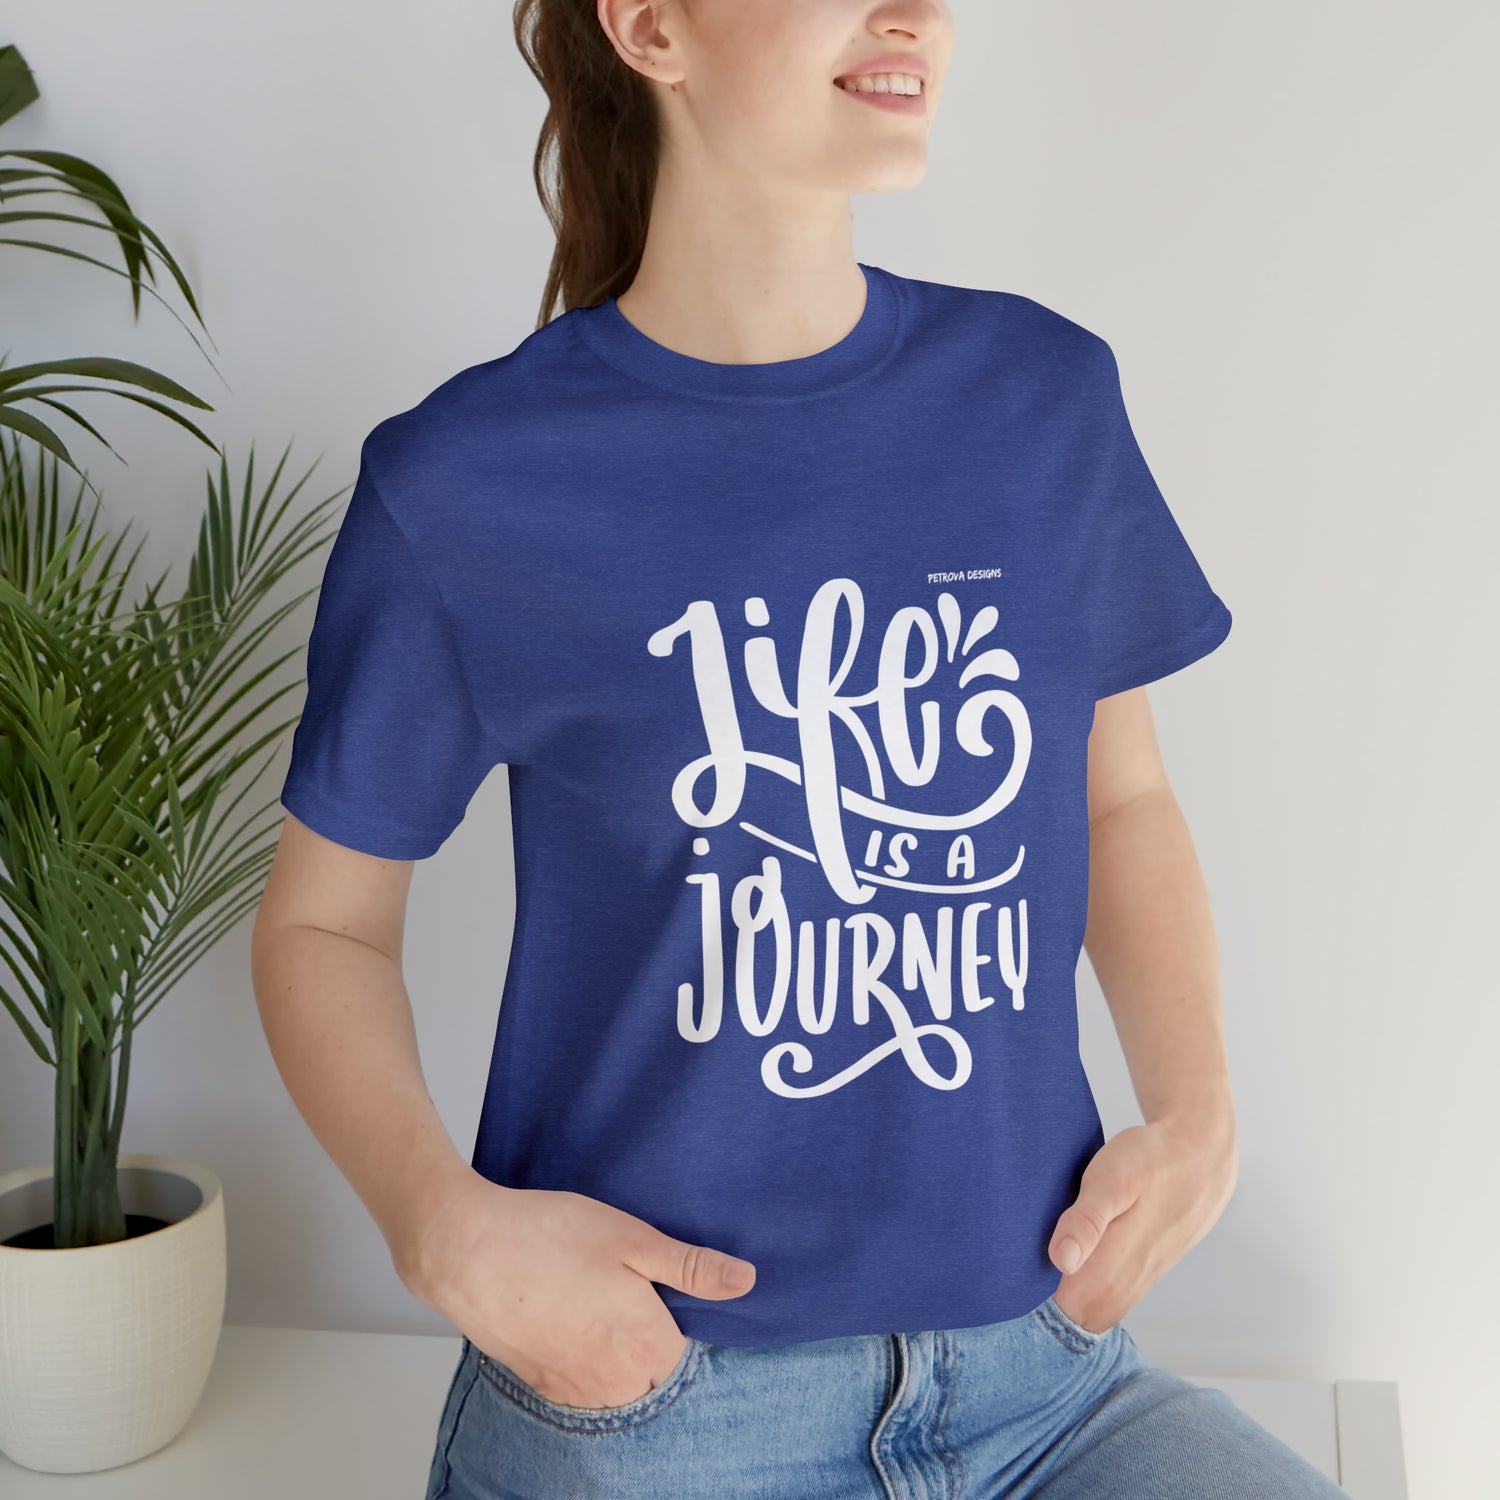 Heather True Royal T-Shirt Tshirt Design Gift for Friend and Family Short Sleeved Shirt Petrova Designs